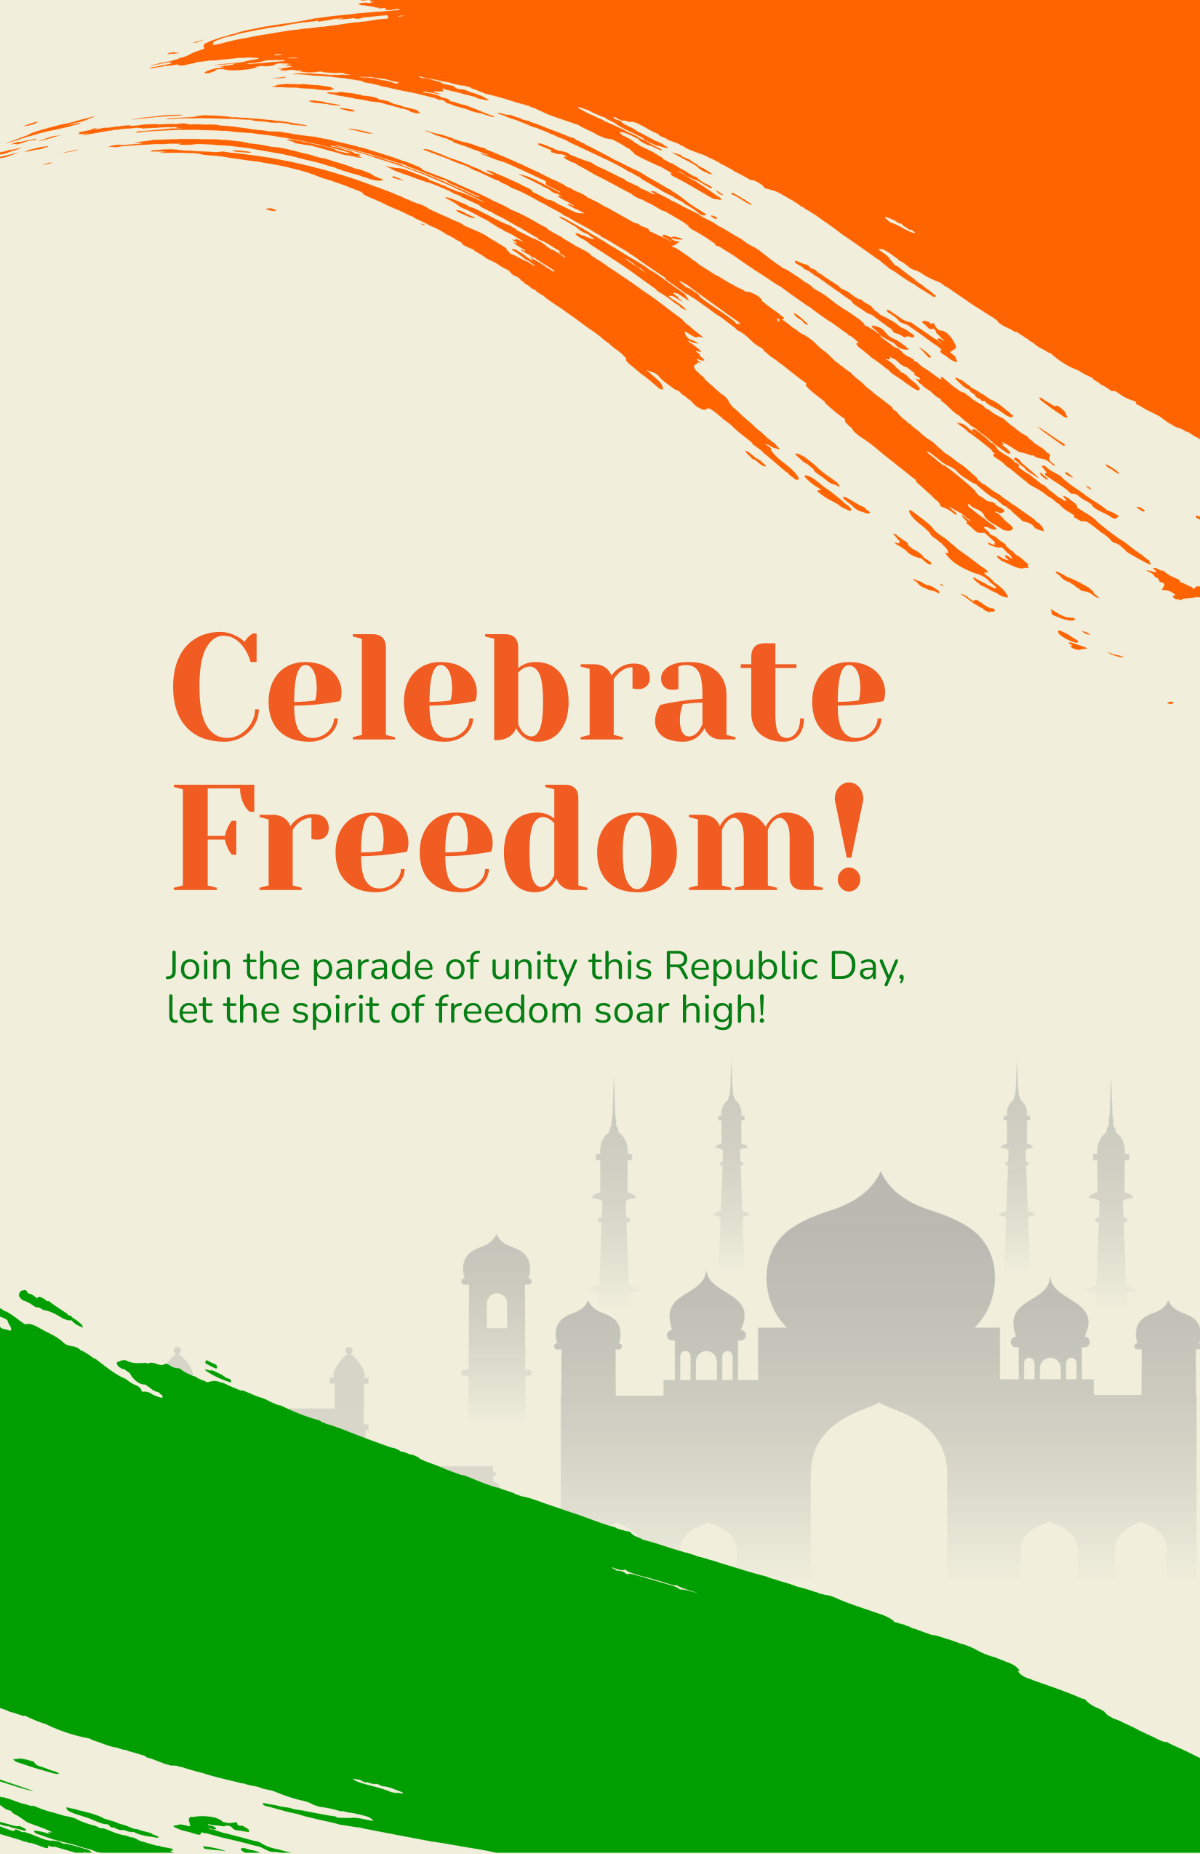 Republic Day Painting Poster Template